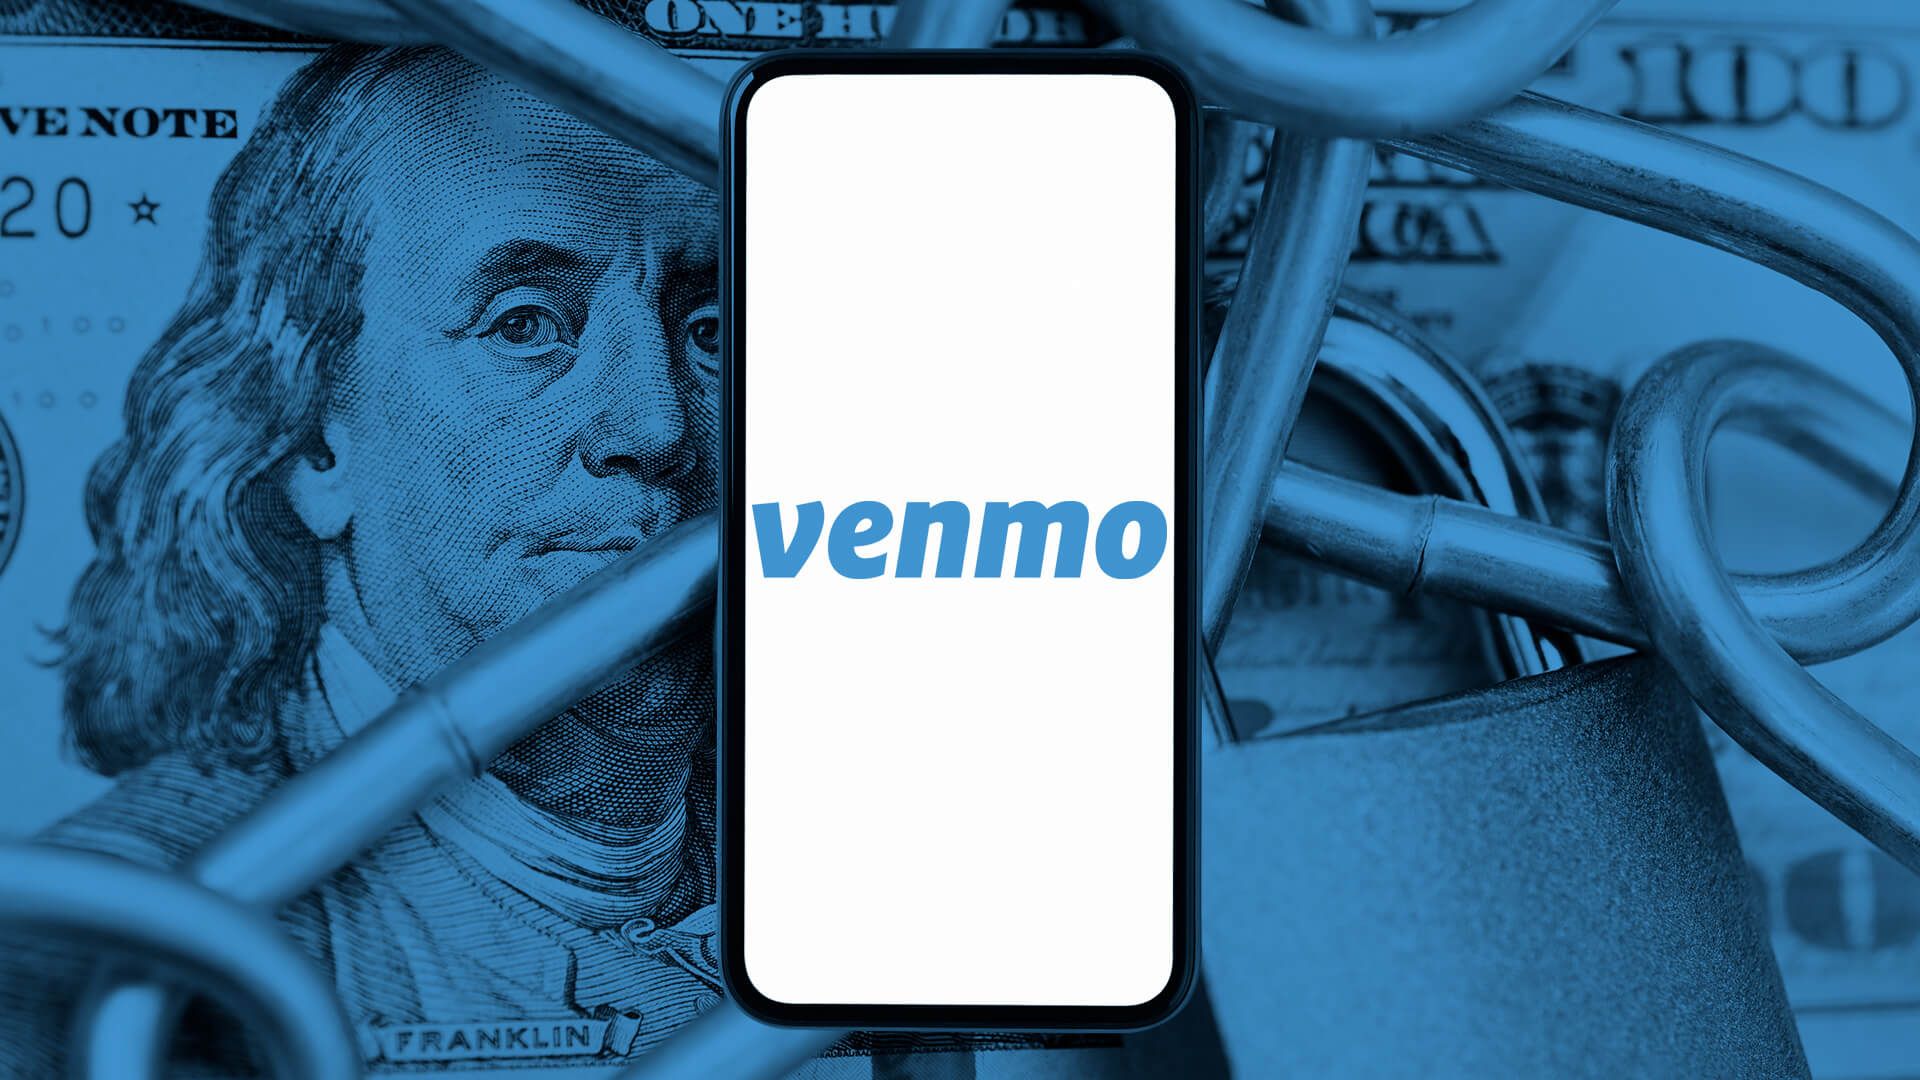 can i buy bitcoin with venmo with a pre